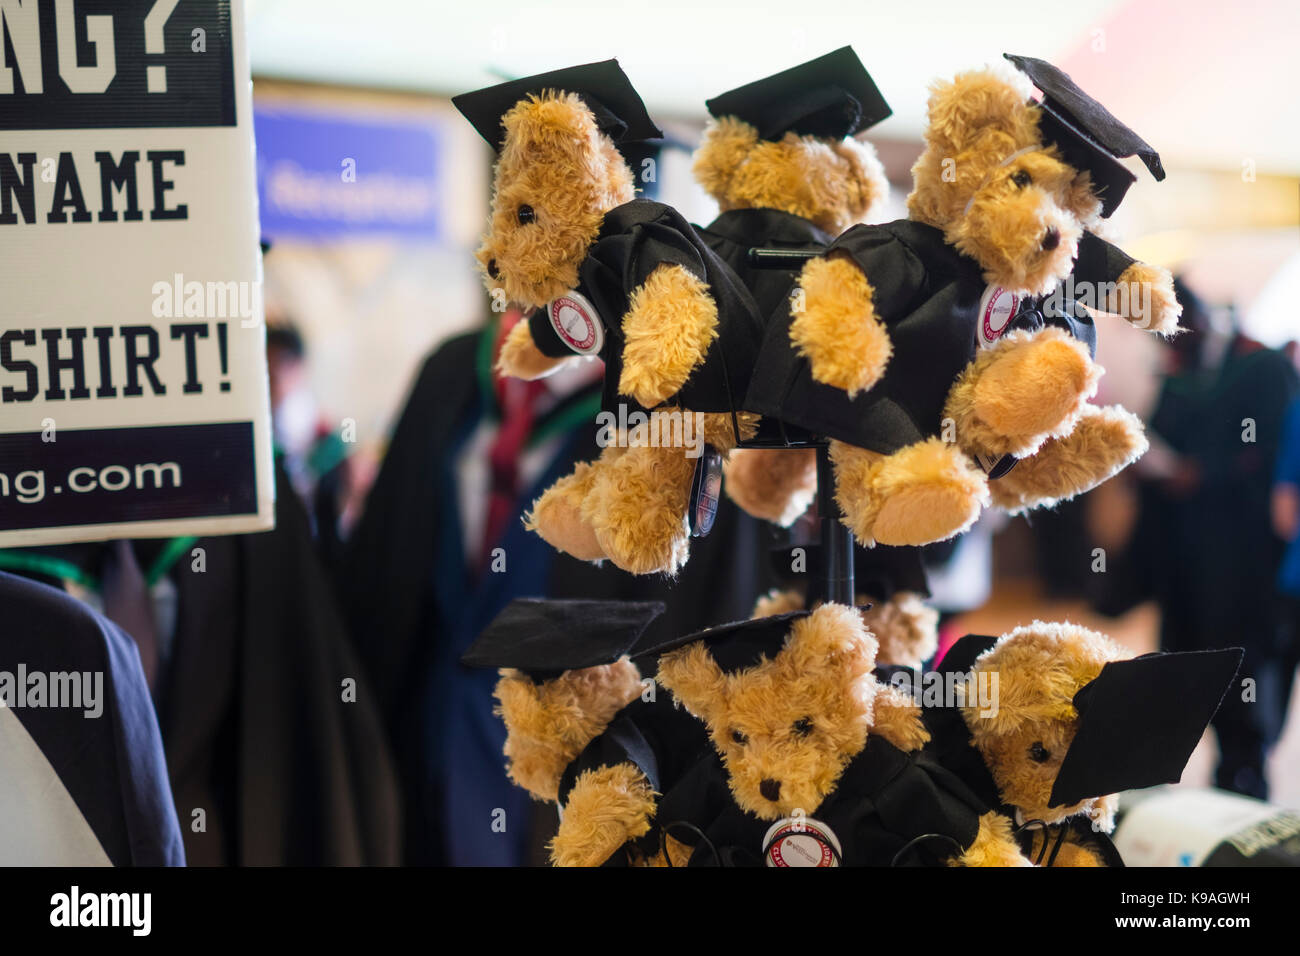 Higher Education in the UK: Aberystwyth University students wearing traditional academic gowns and mortar boards  on their graduation day, July 2017 Stock Photo